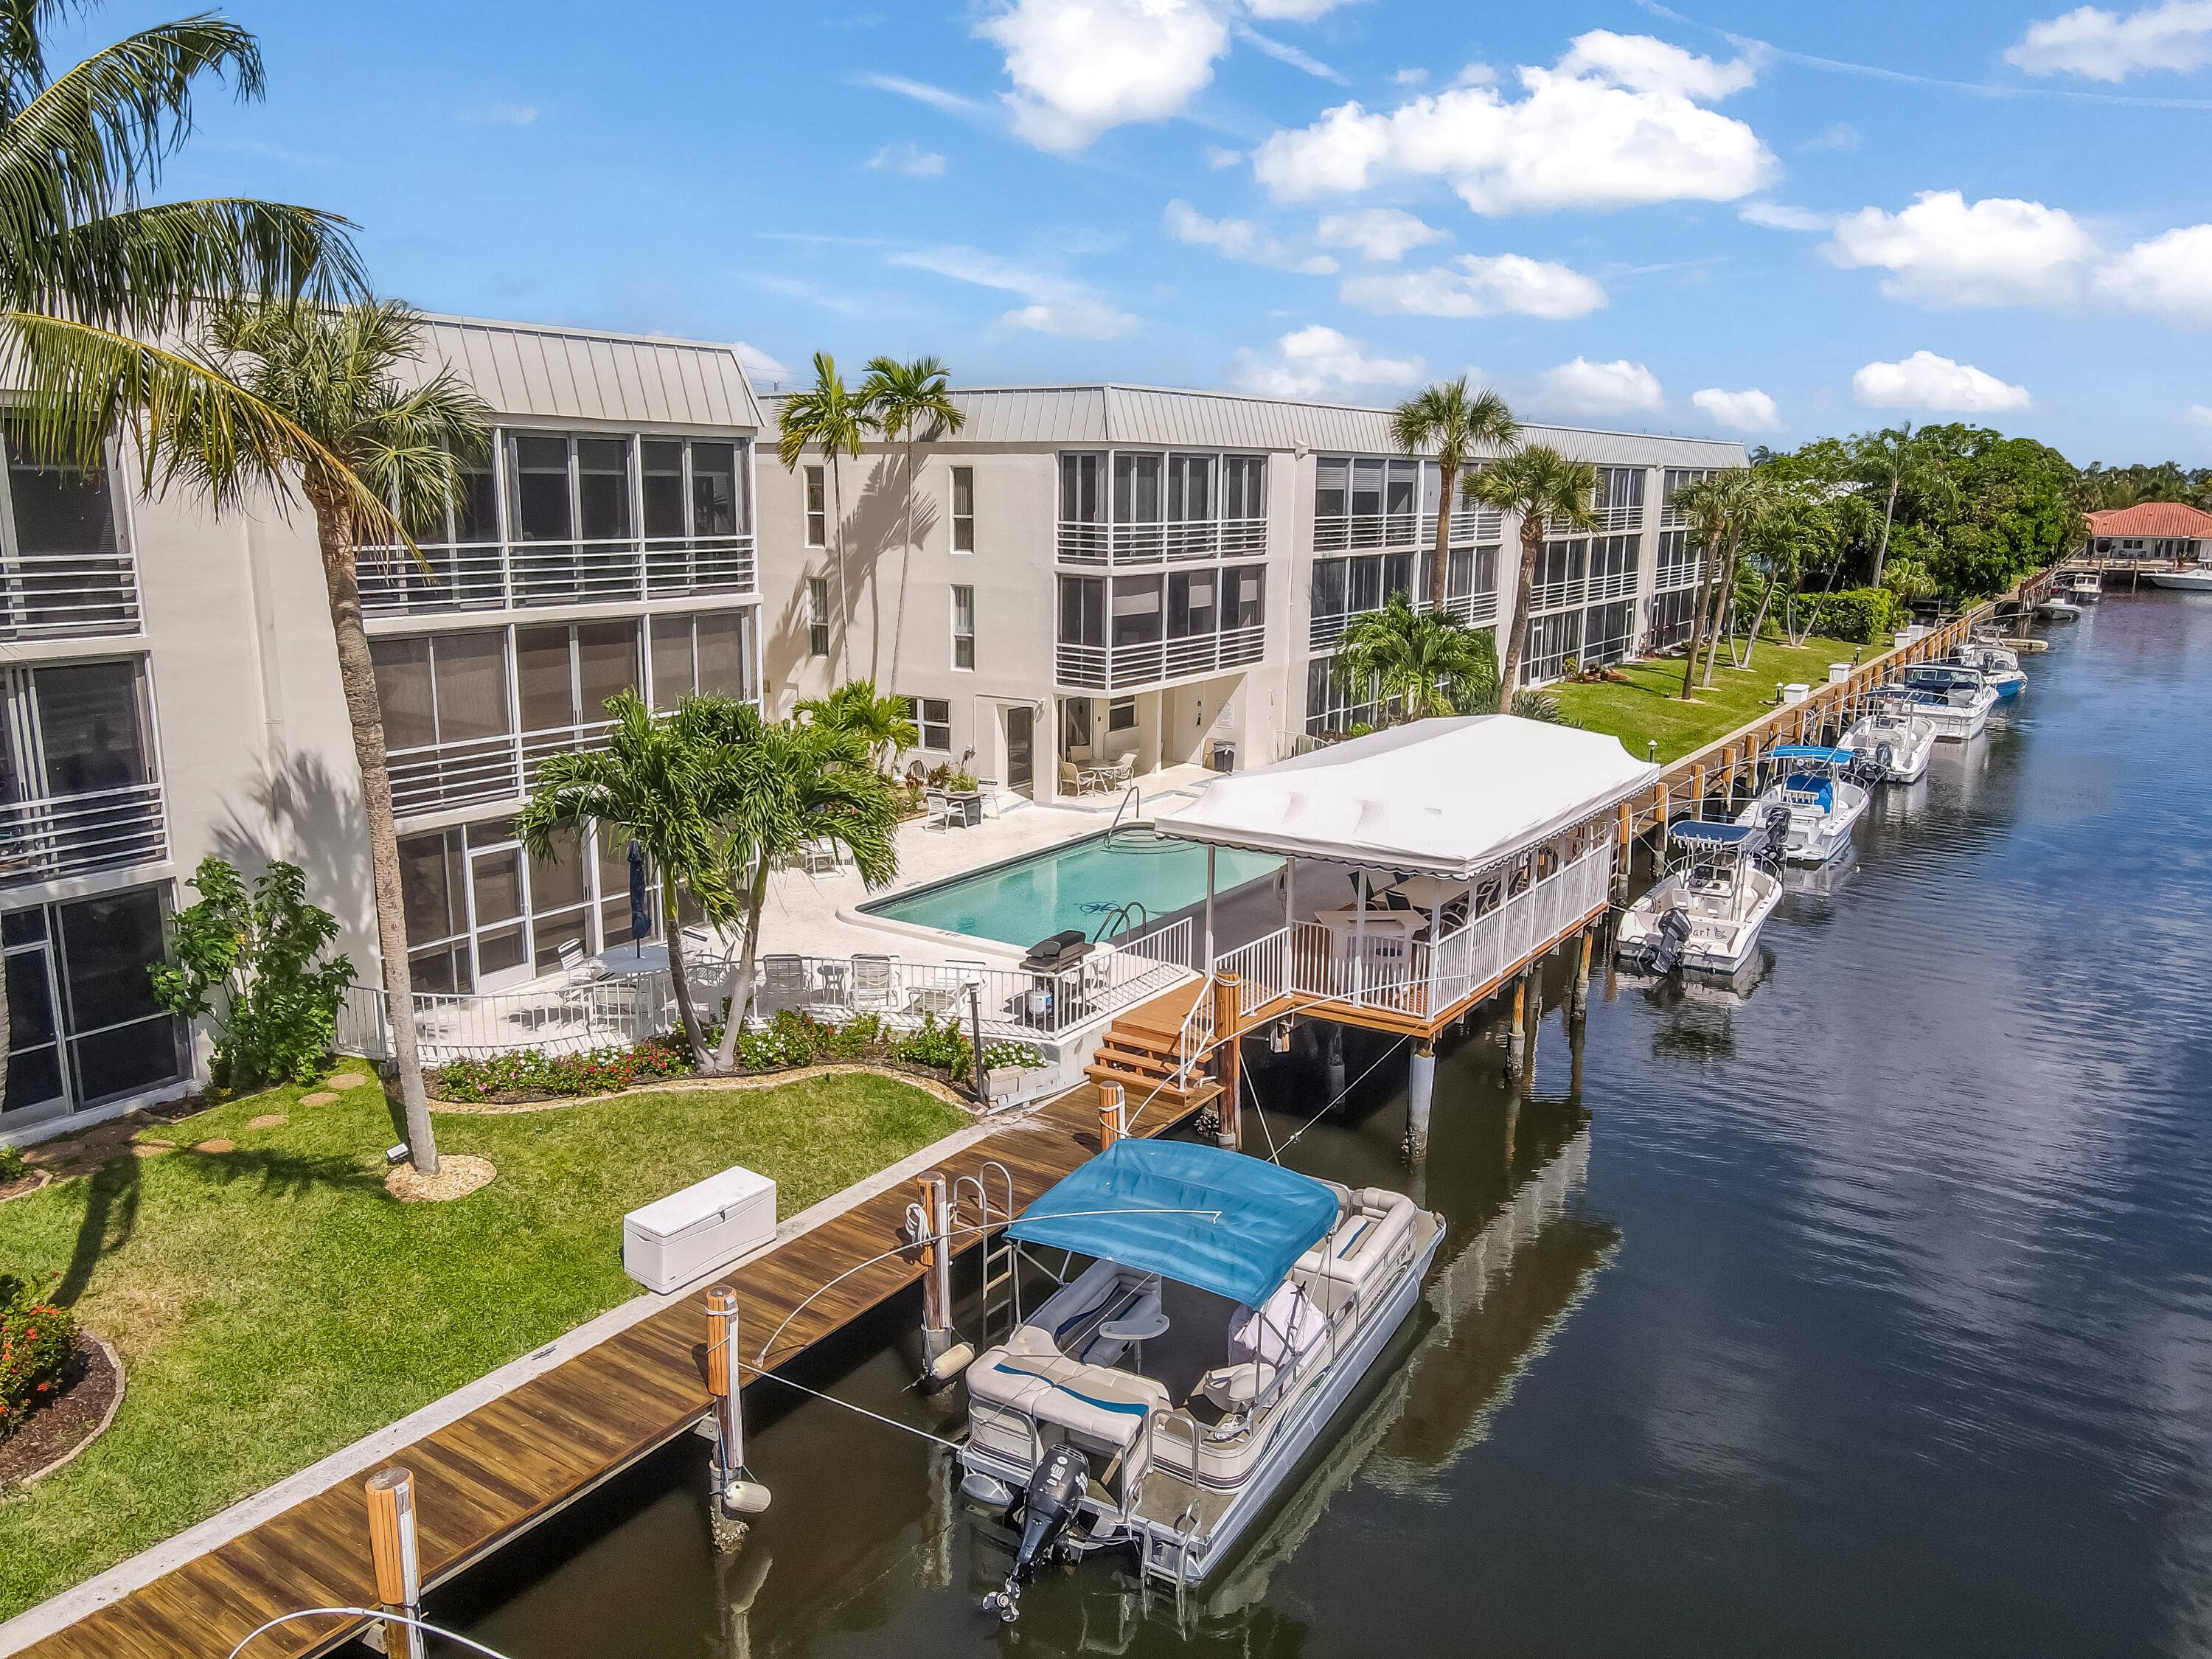 Experience the ultimate waterfront lifestyle in this spacious 2 bed, 2 bath condo in East Boca Raton's exclusive 55 community.